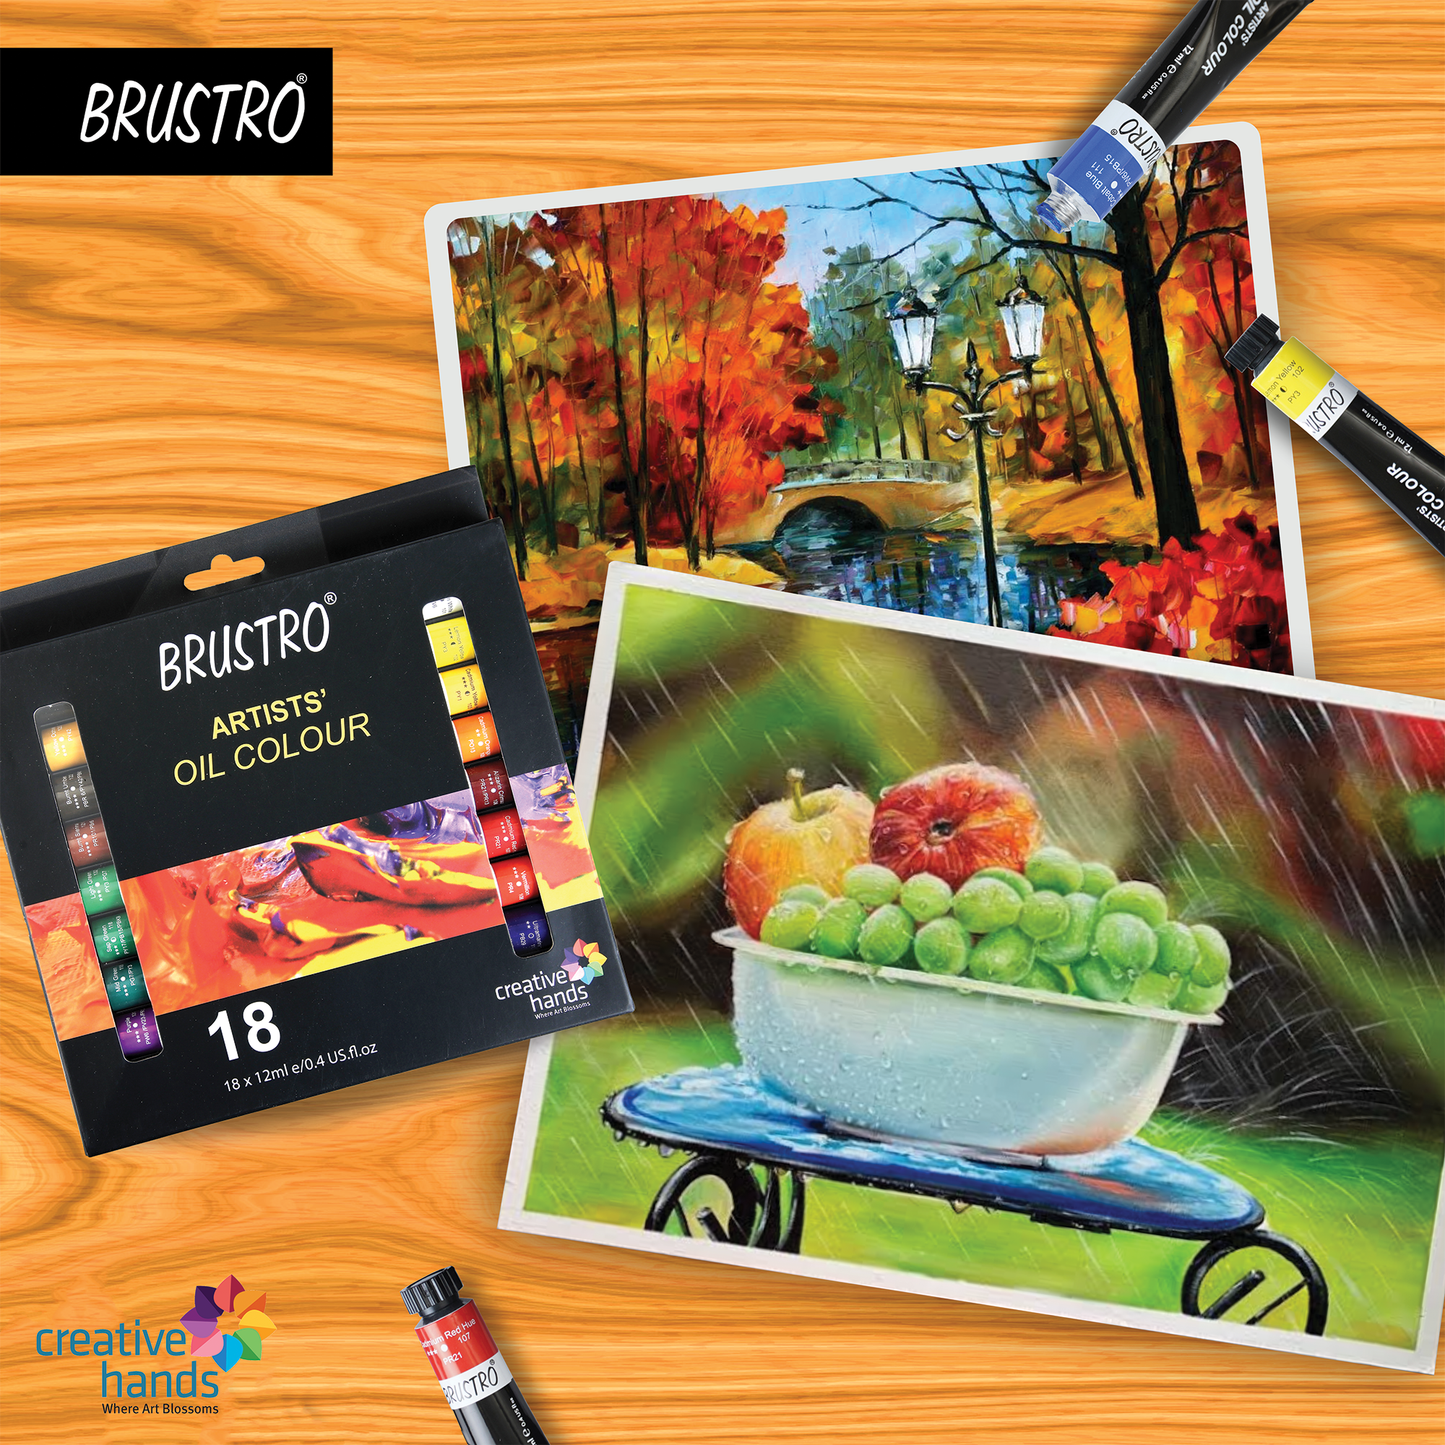 Brustro White Bristle Hair Brushes (Pack of 13) with Artists Oil Colour Set of 18 Colours X 12ML Tubes and Oil Painting Paper 300 GSM A4 (Pack of 9 + 3 Free Sheets)